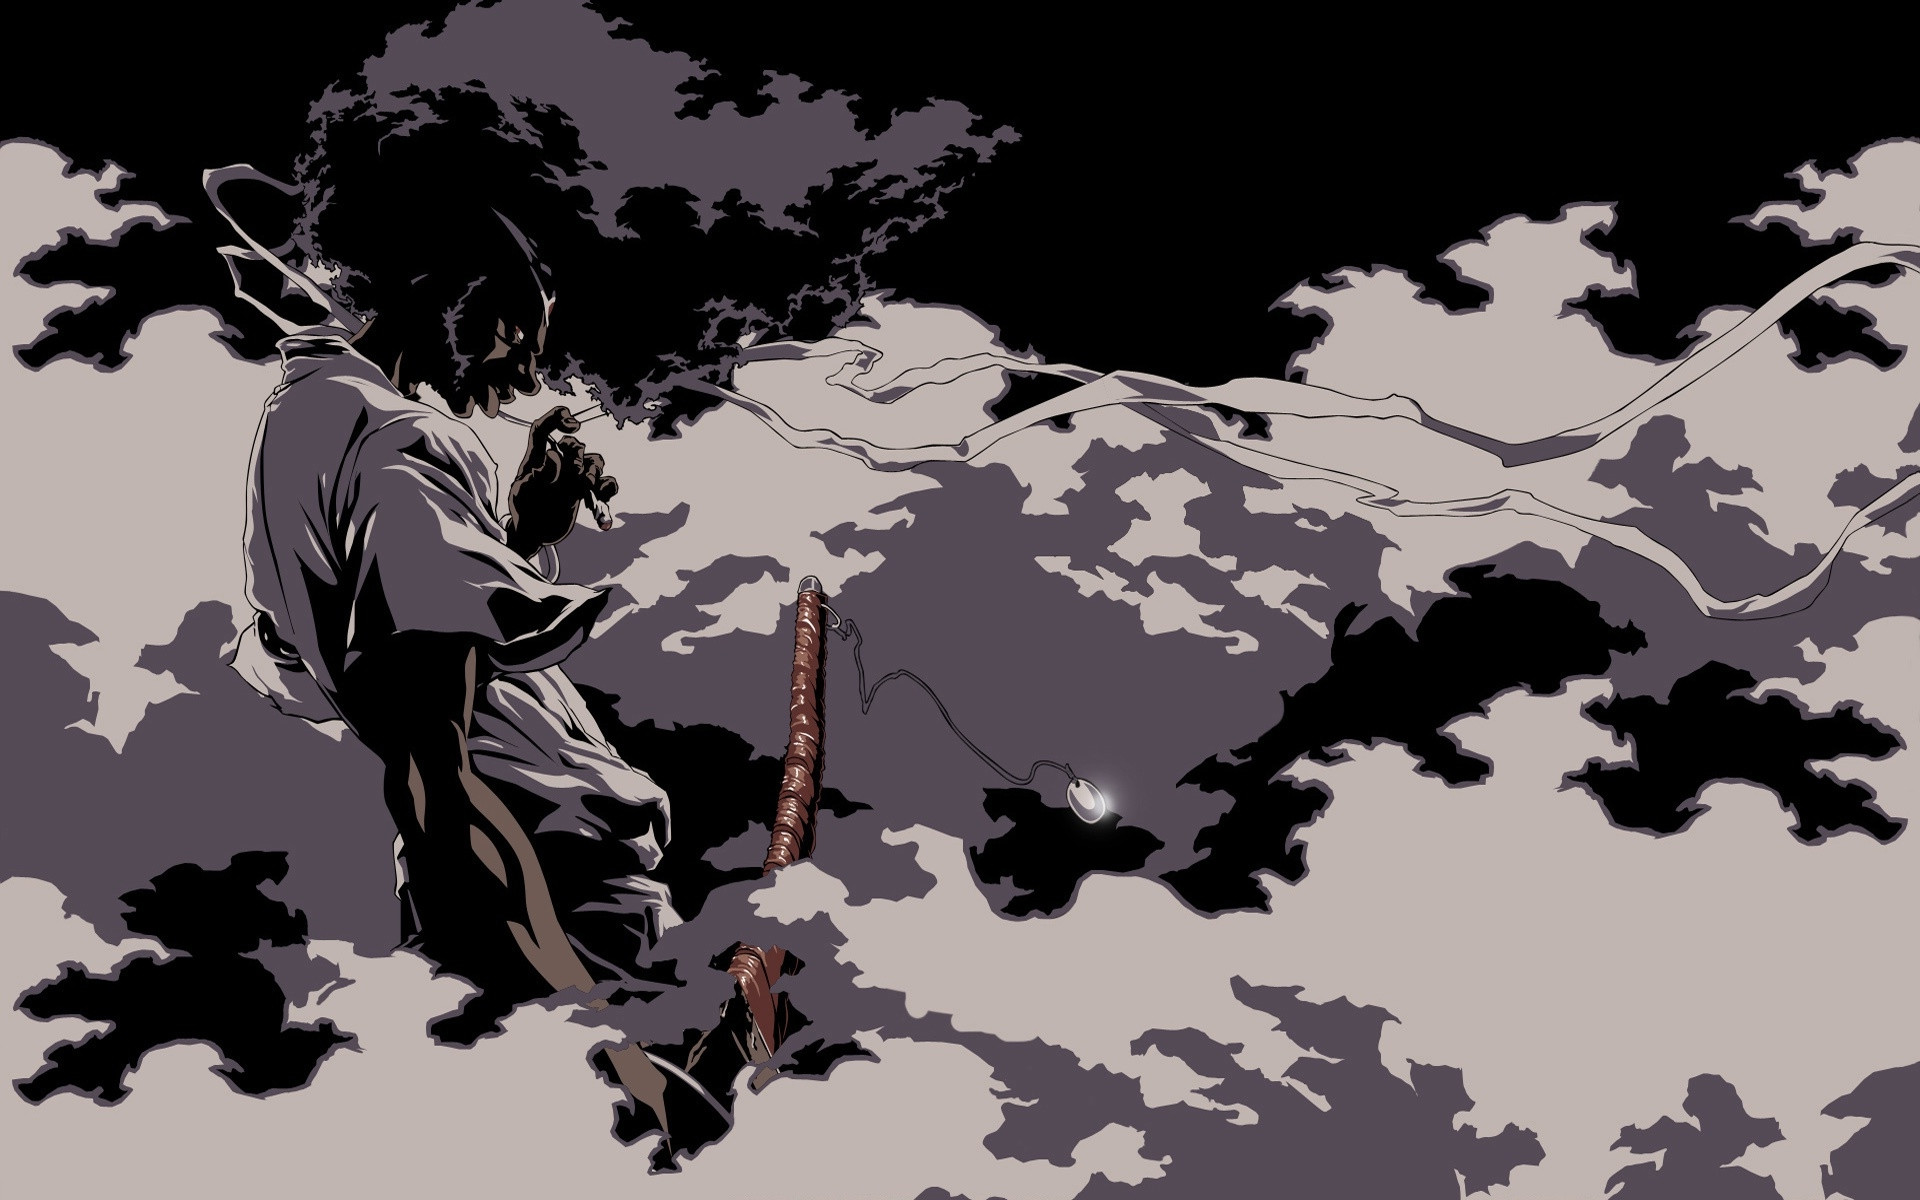 1920x1200 afro samurai justice wallpapers wide with high resolution desktop wallpaper  on anime category similar with iphone justice kuma resurrection sio